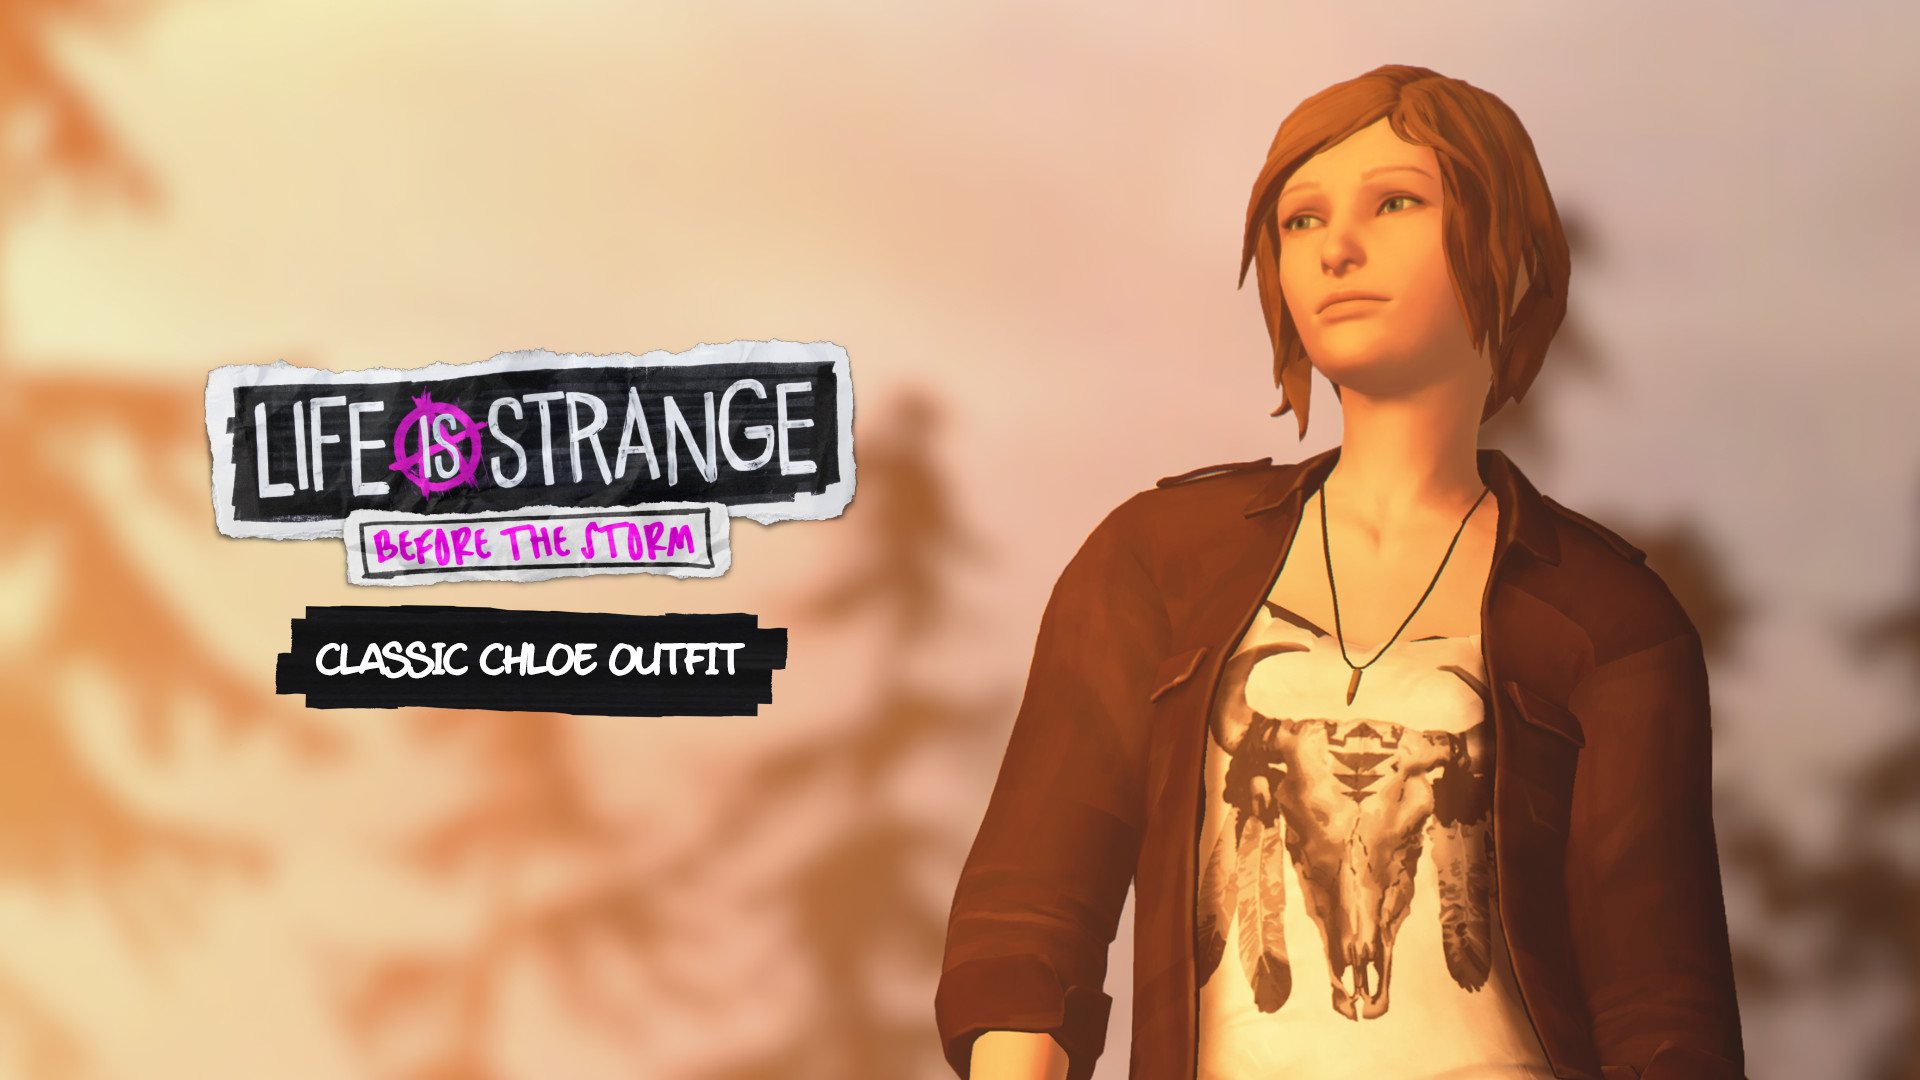 Life is Strange: Before the Storm - Classic Chloe Outfit Pack DLC XBOX One CD Key 0.89 $